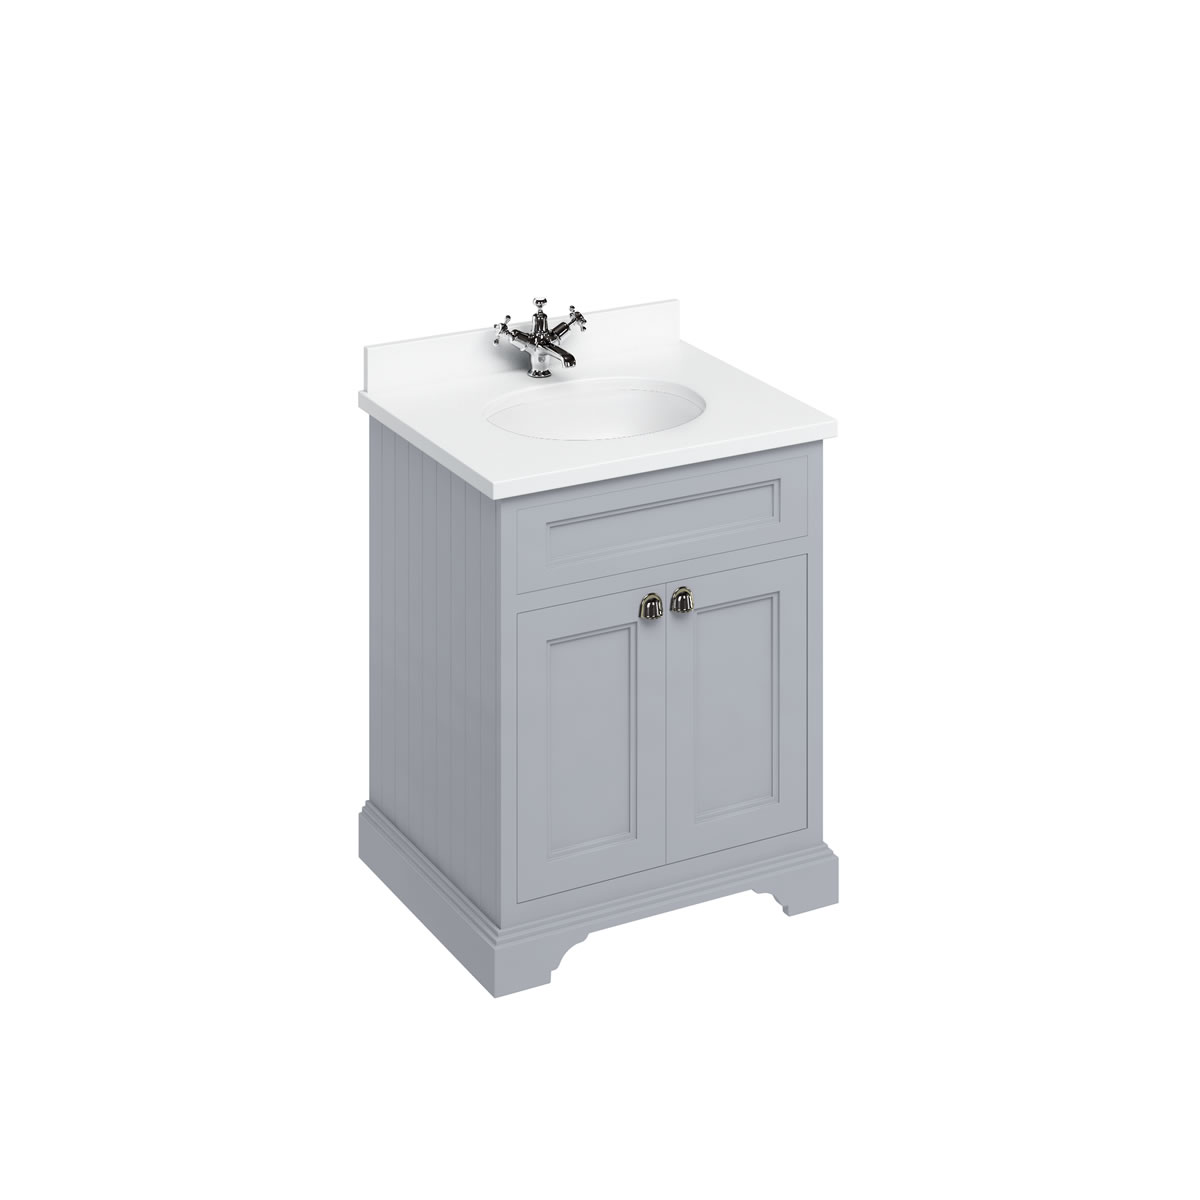 Freestanding 65 Vanity Unit with doors - Classic Grey and Minerva white worktop with integrated white basin 